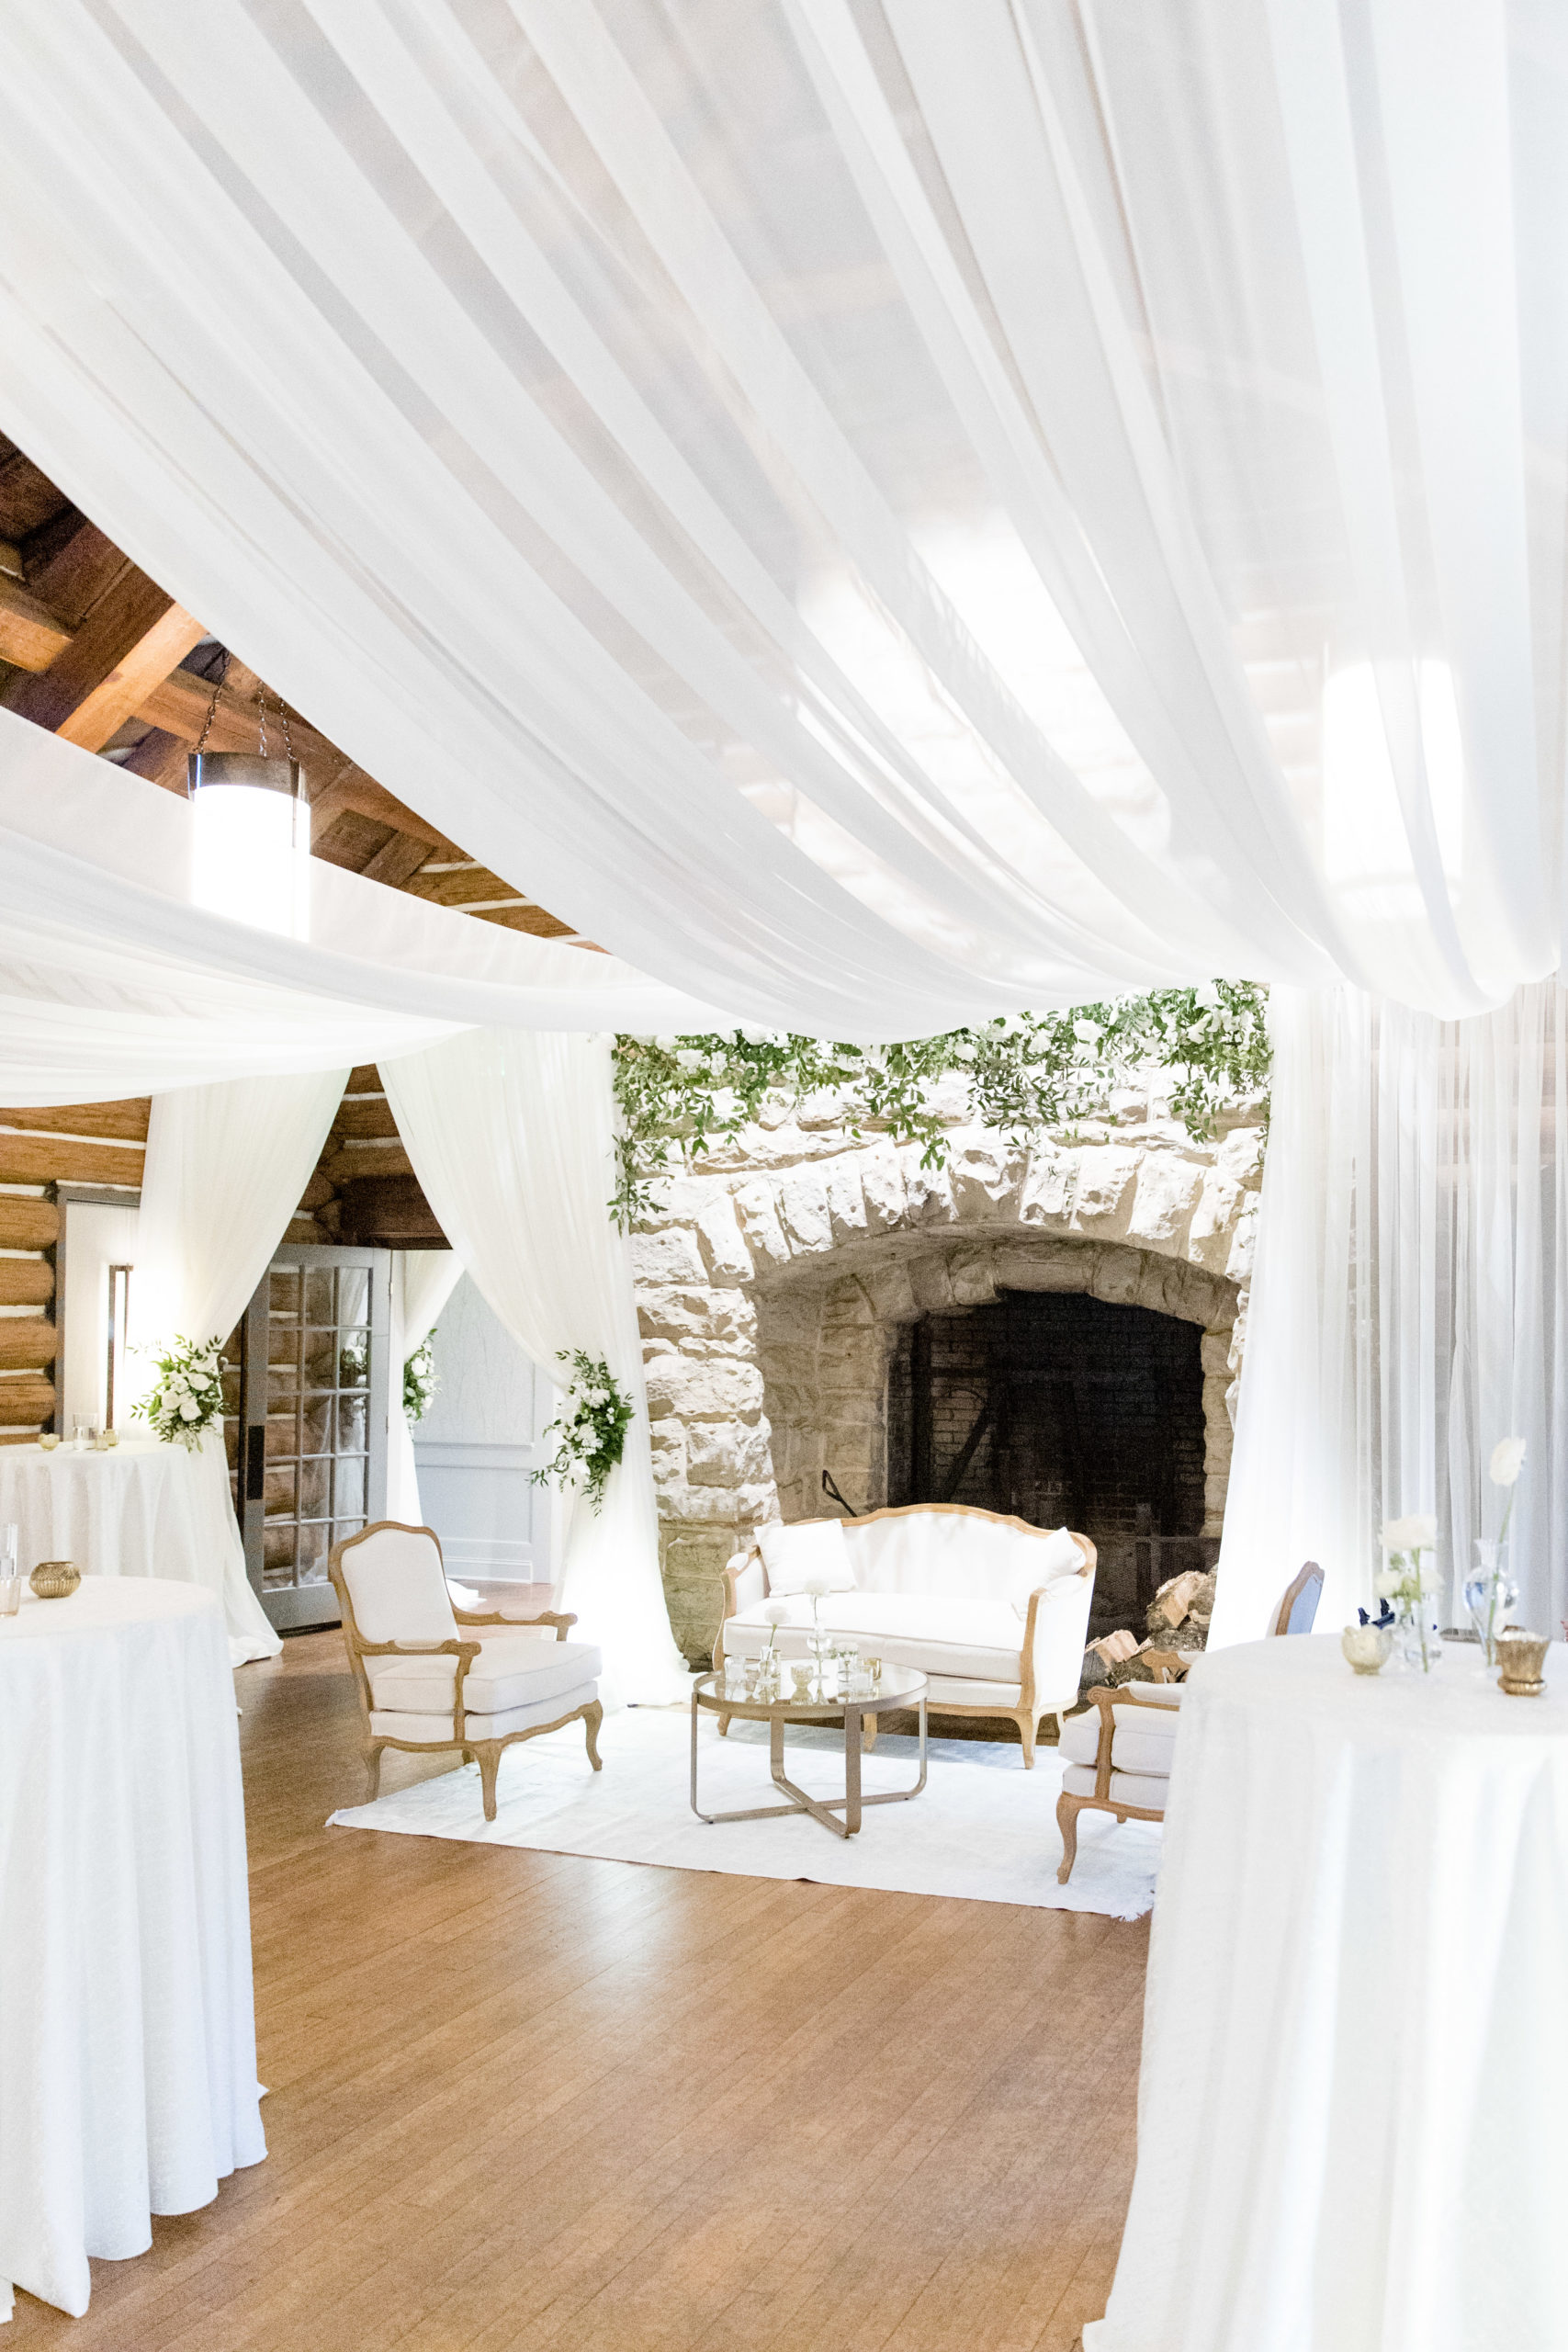 White draping and lounge area at wedding reception.